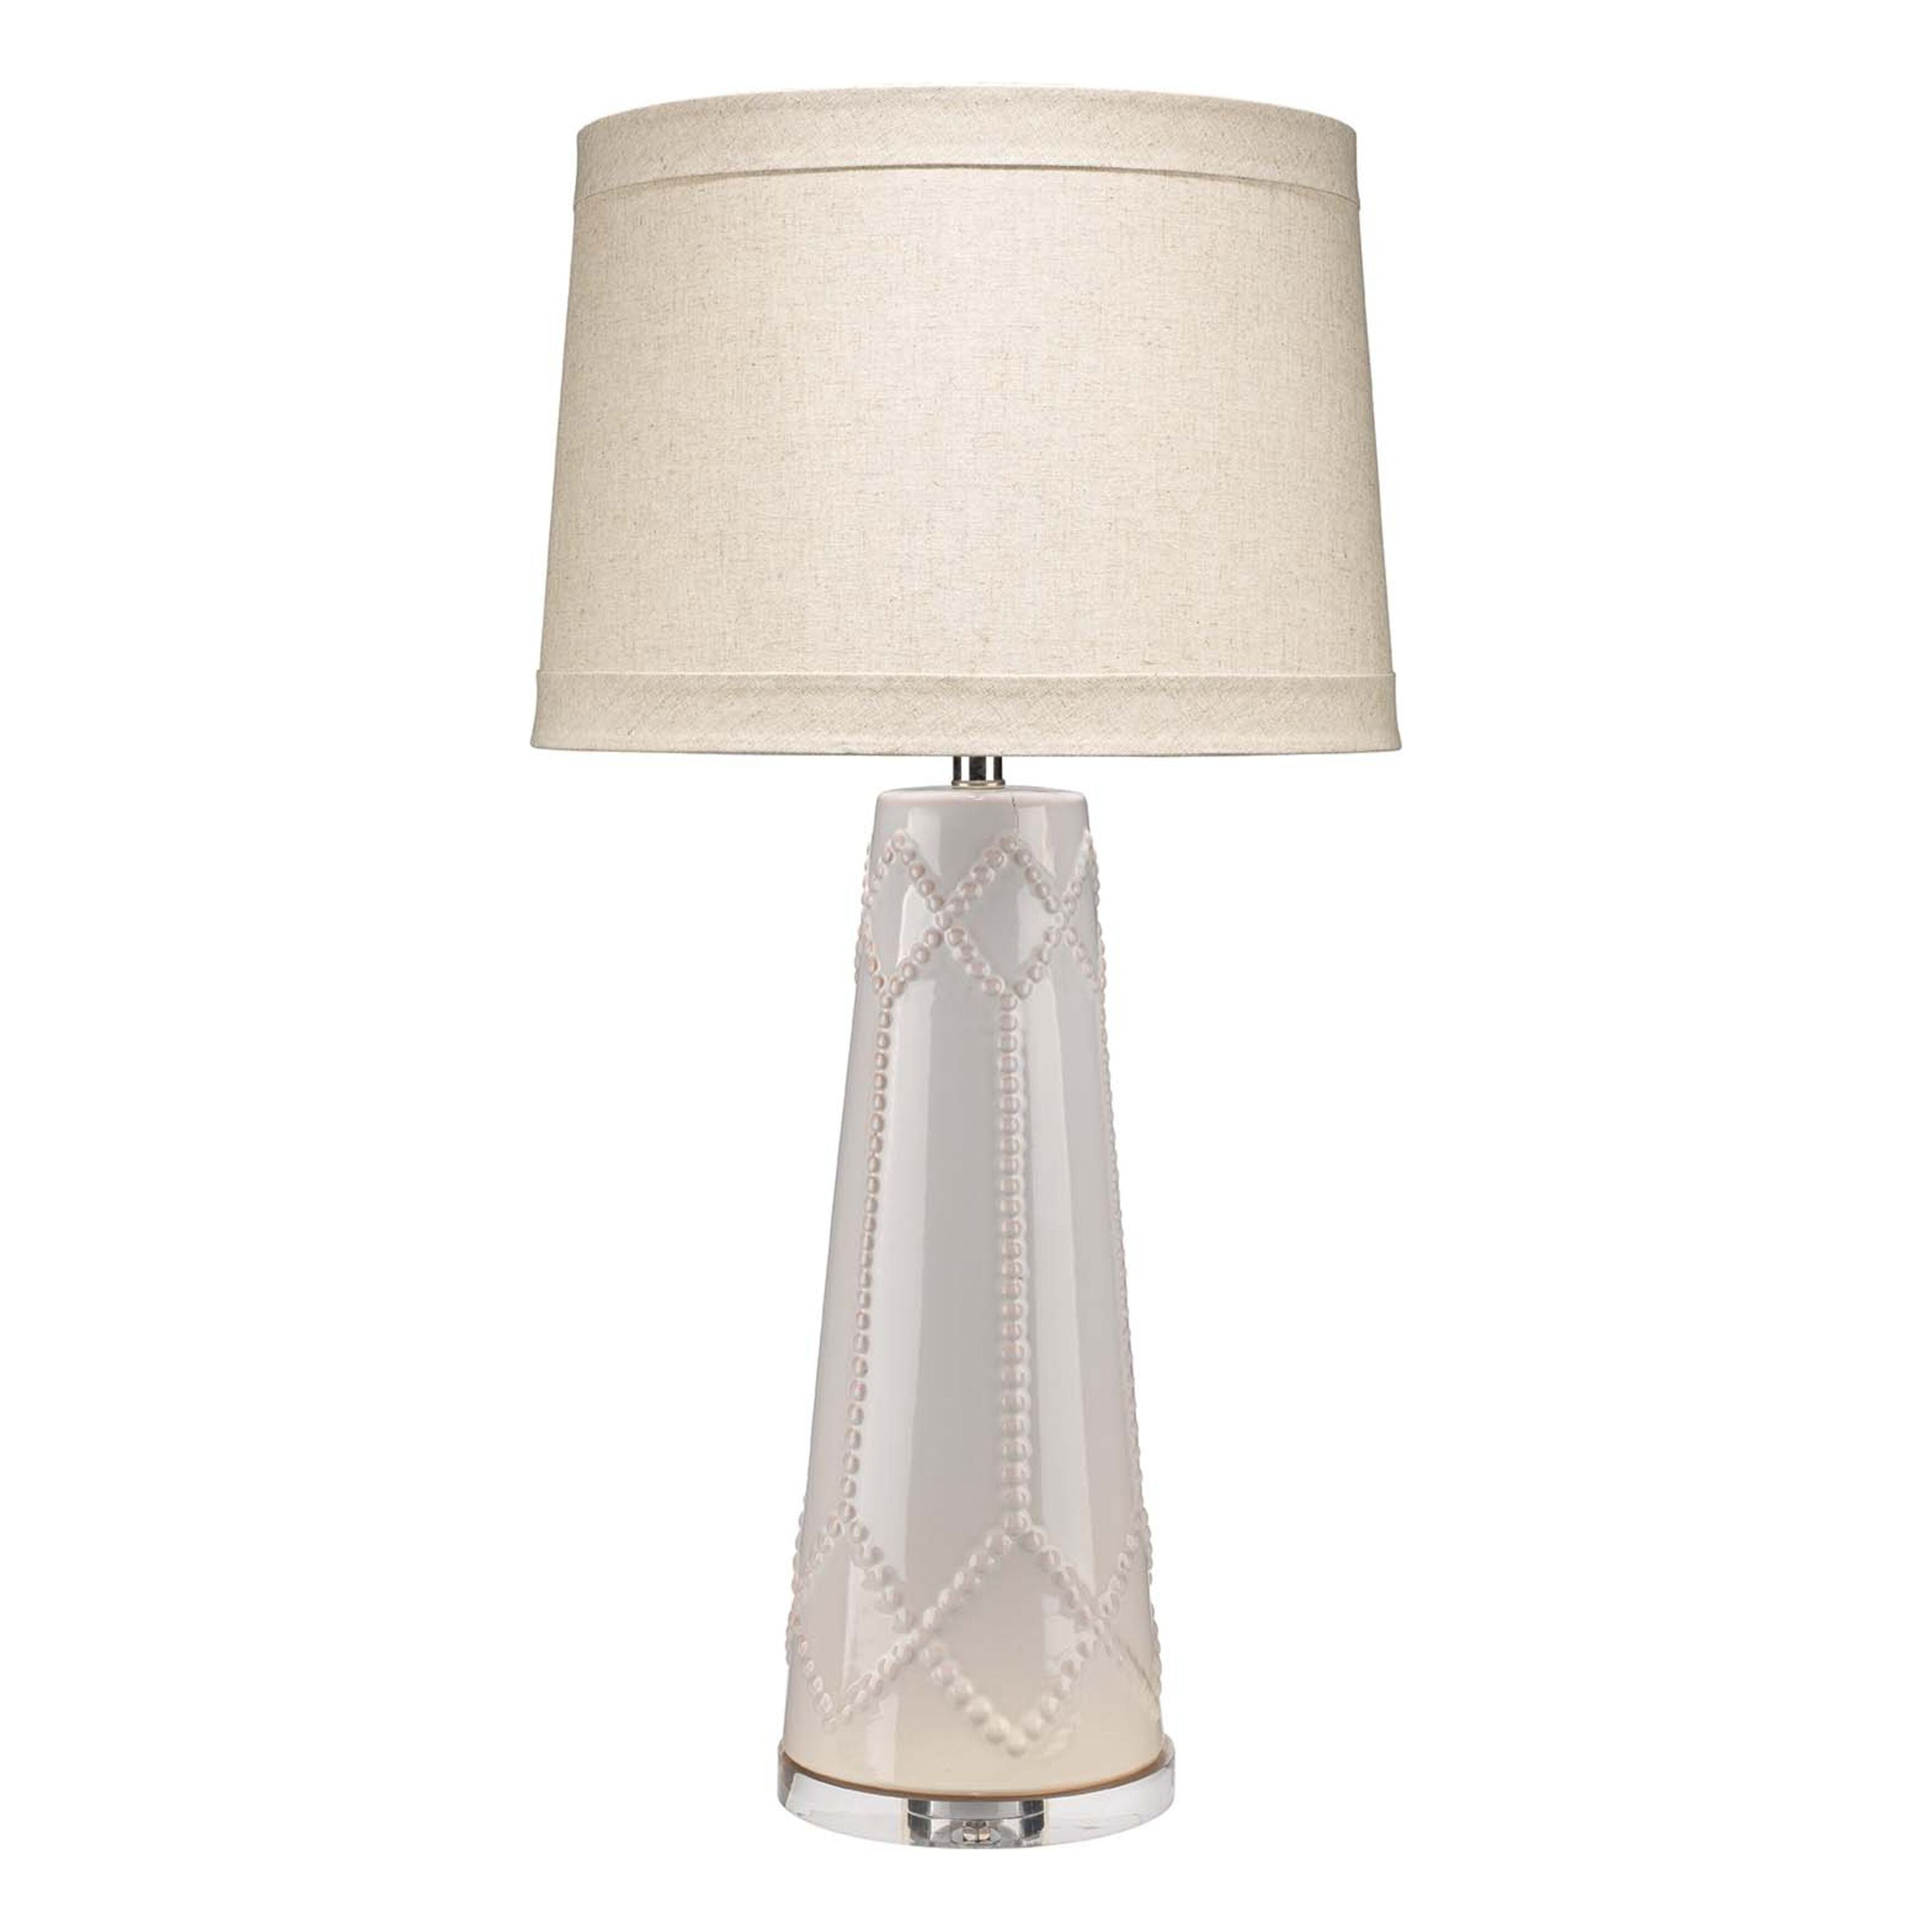 Jamie Young Company - 9HOBNAILWHIT - Hobnail Table Lamp - Hobnail - Off White